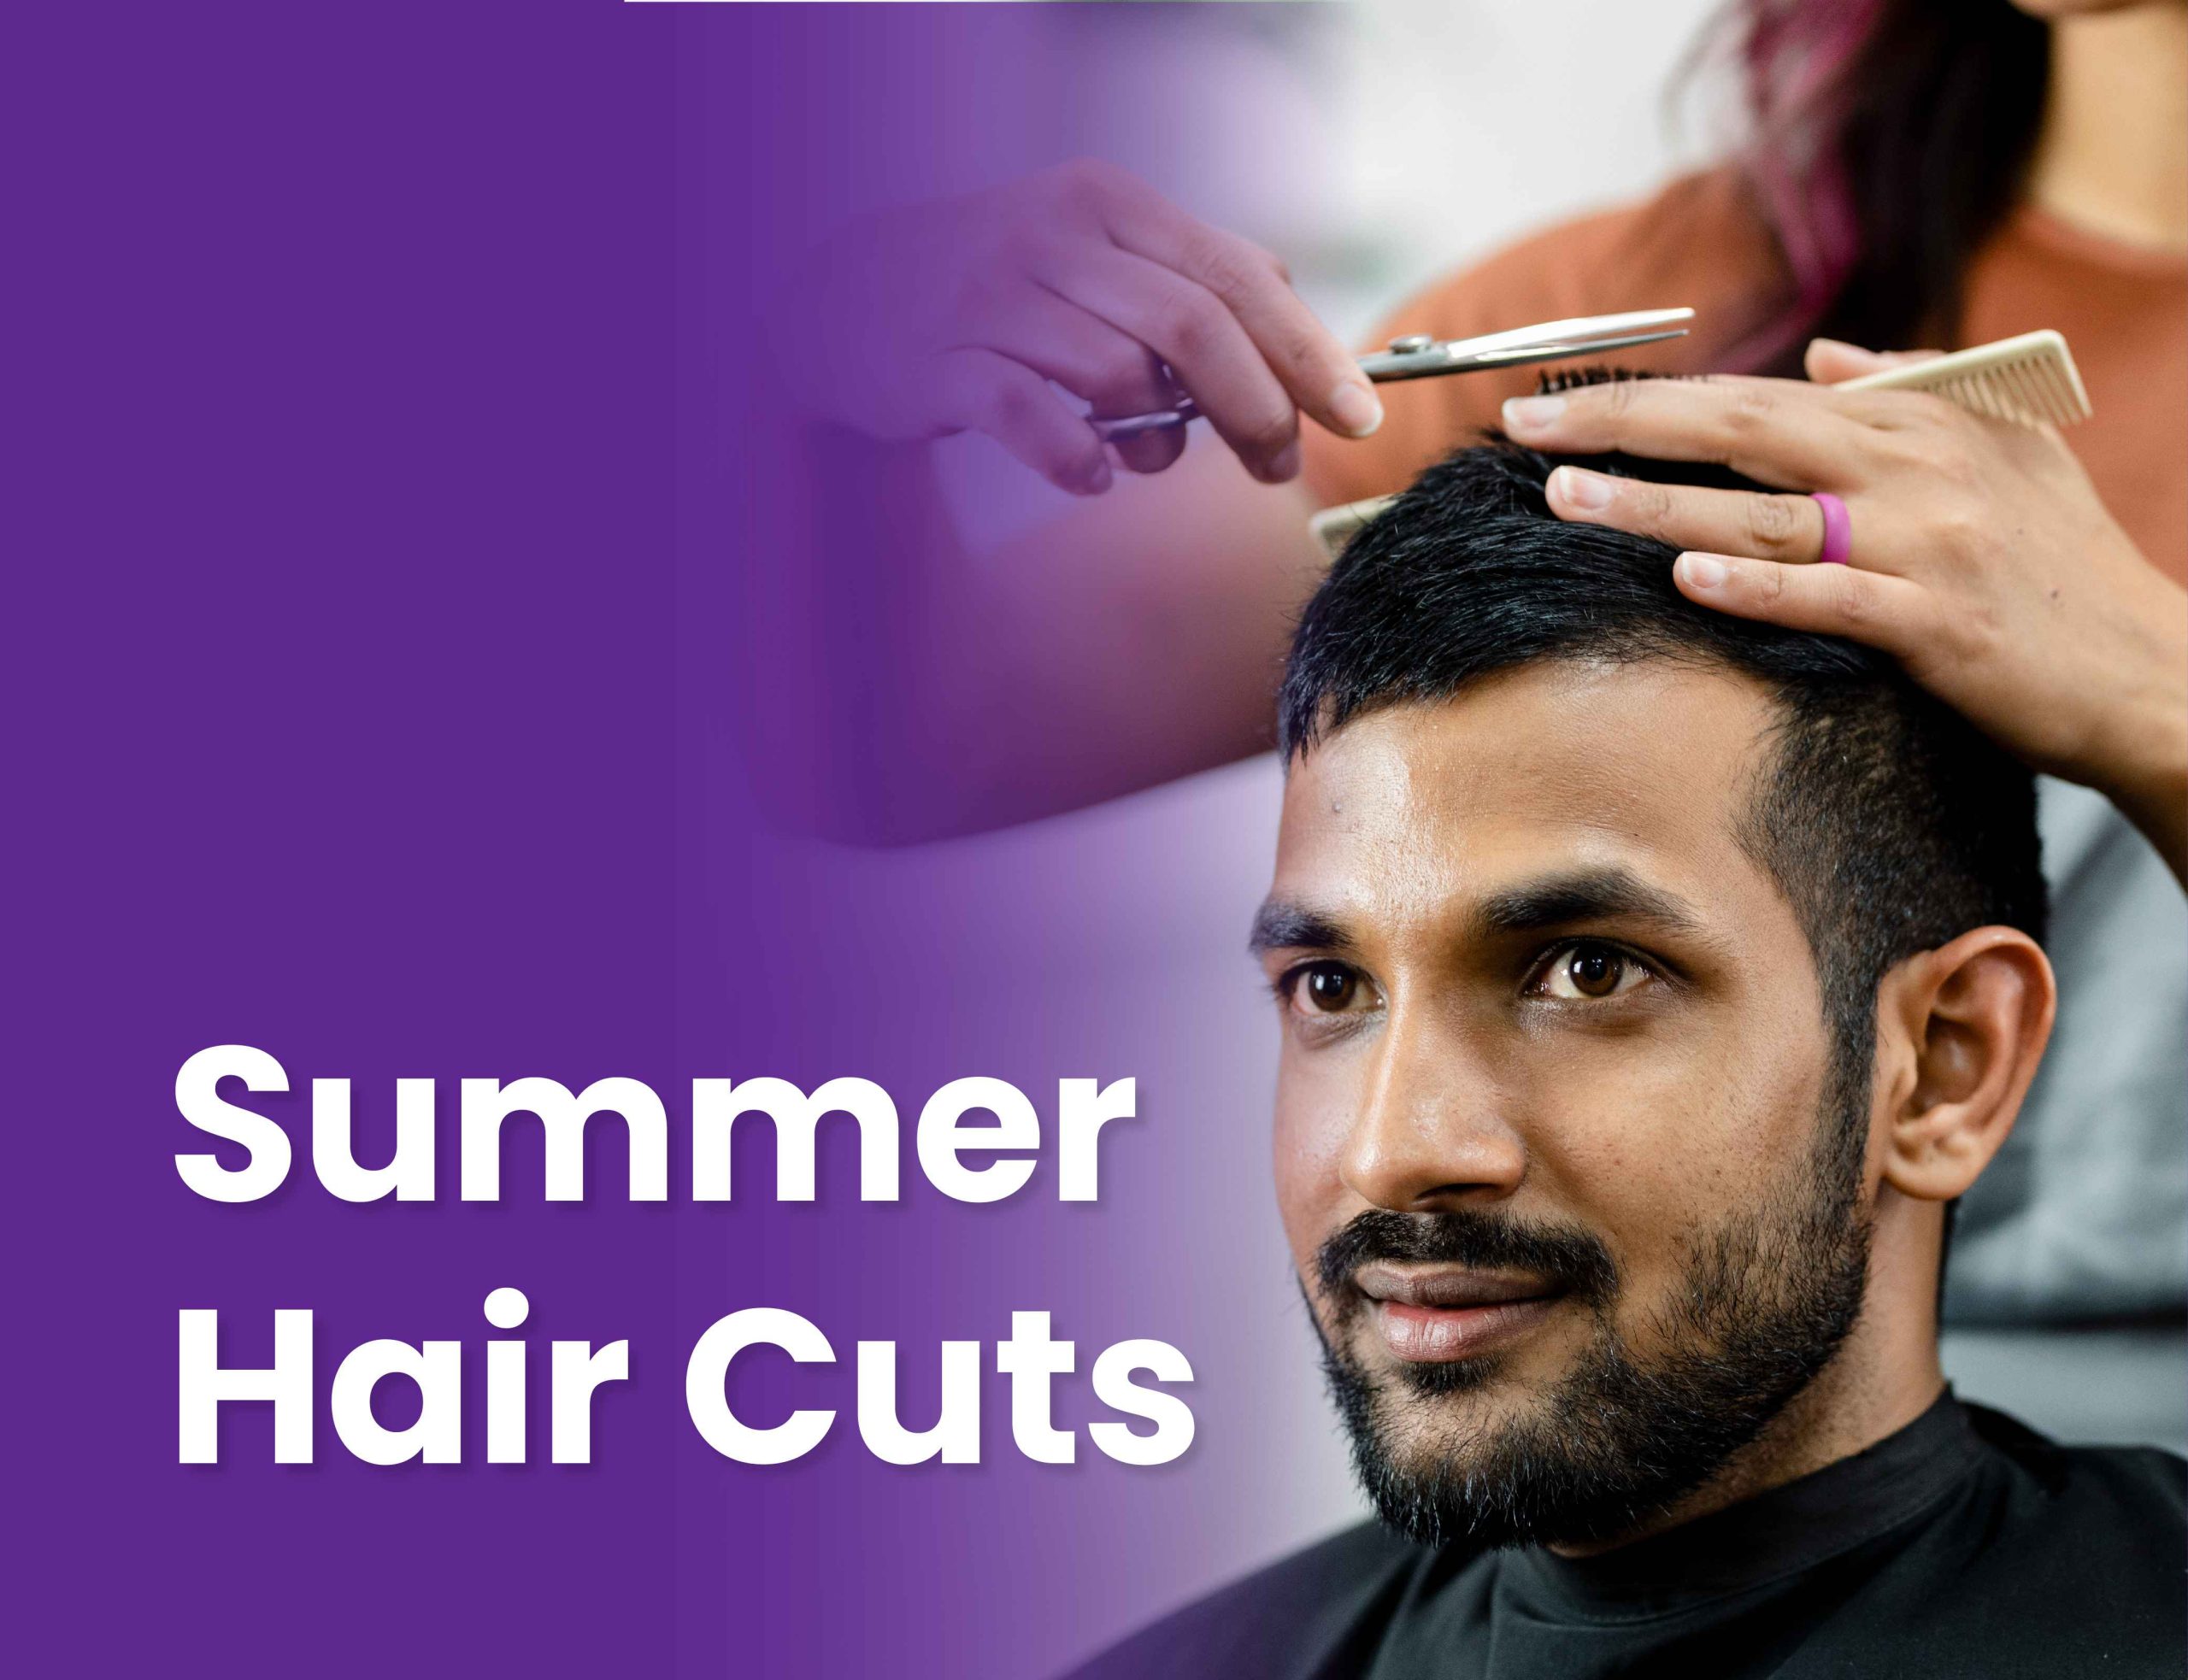 Summer Hair Cuts That Go With Every Look